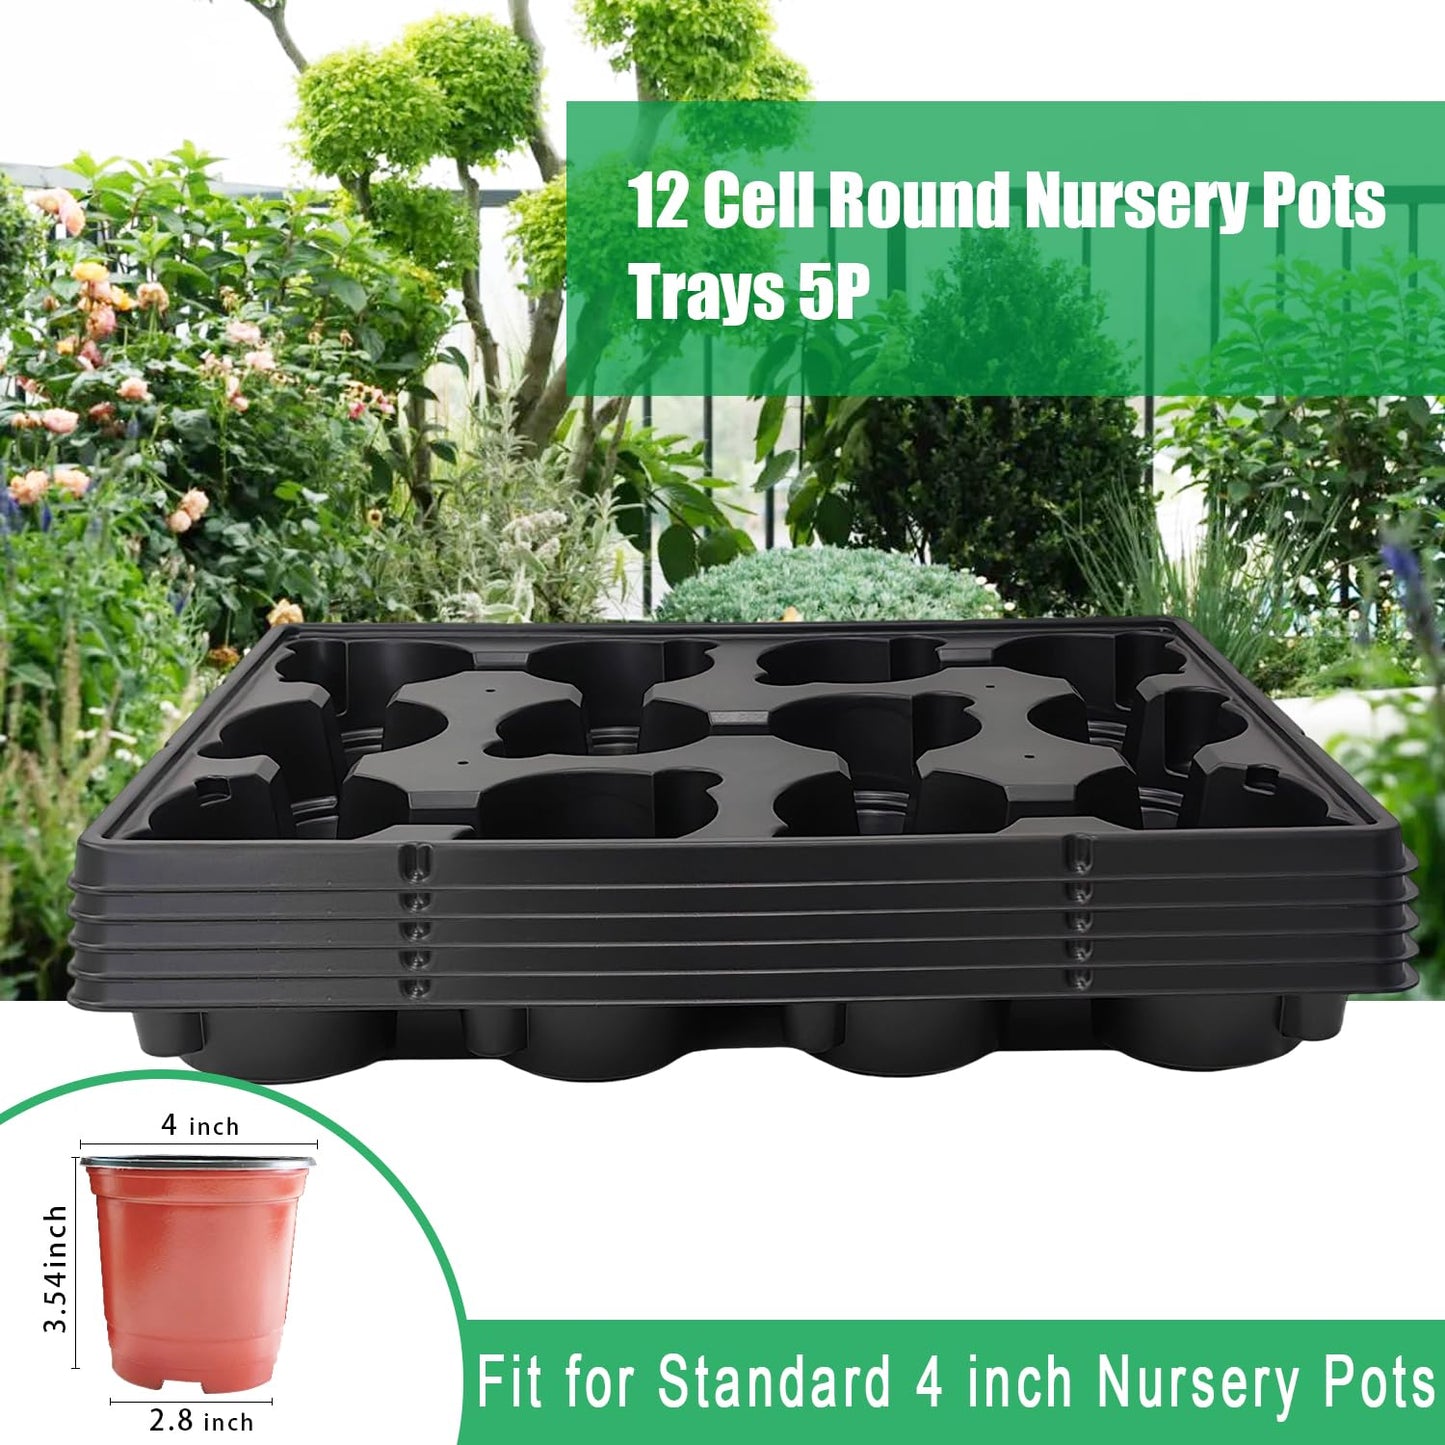 RooTrimmer 12 Cell Round Nursery Pots Trays Thickened Durable Seedling Pots Shuttle Carrying Trays for Holding 4 inch Nursery Pots (16.85" × 12.6", 5-Pack)